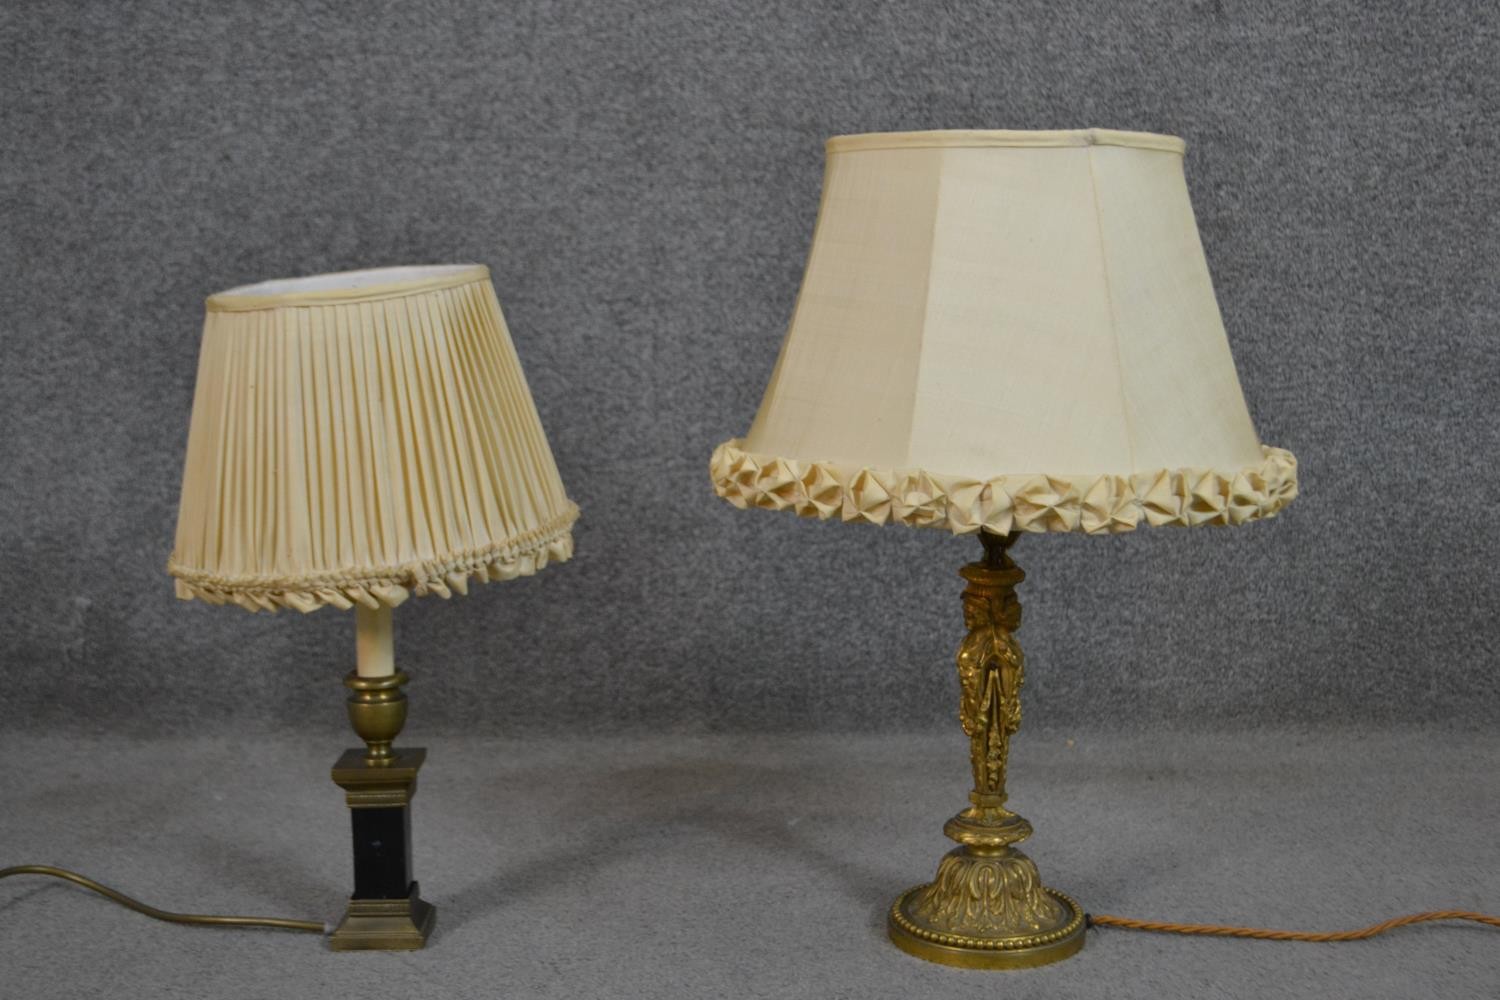 Two 19th century table lamps, one gilt metal with figural design and the other black marble